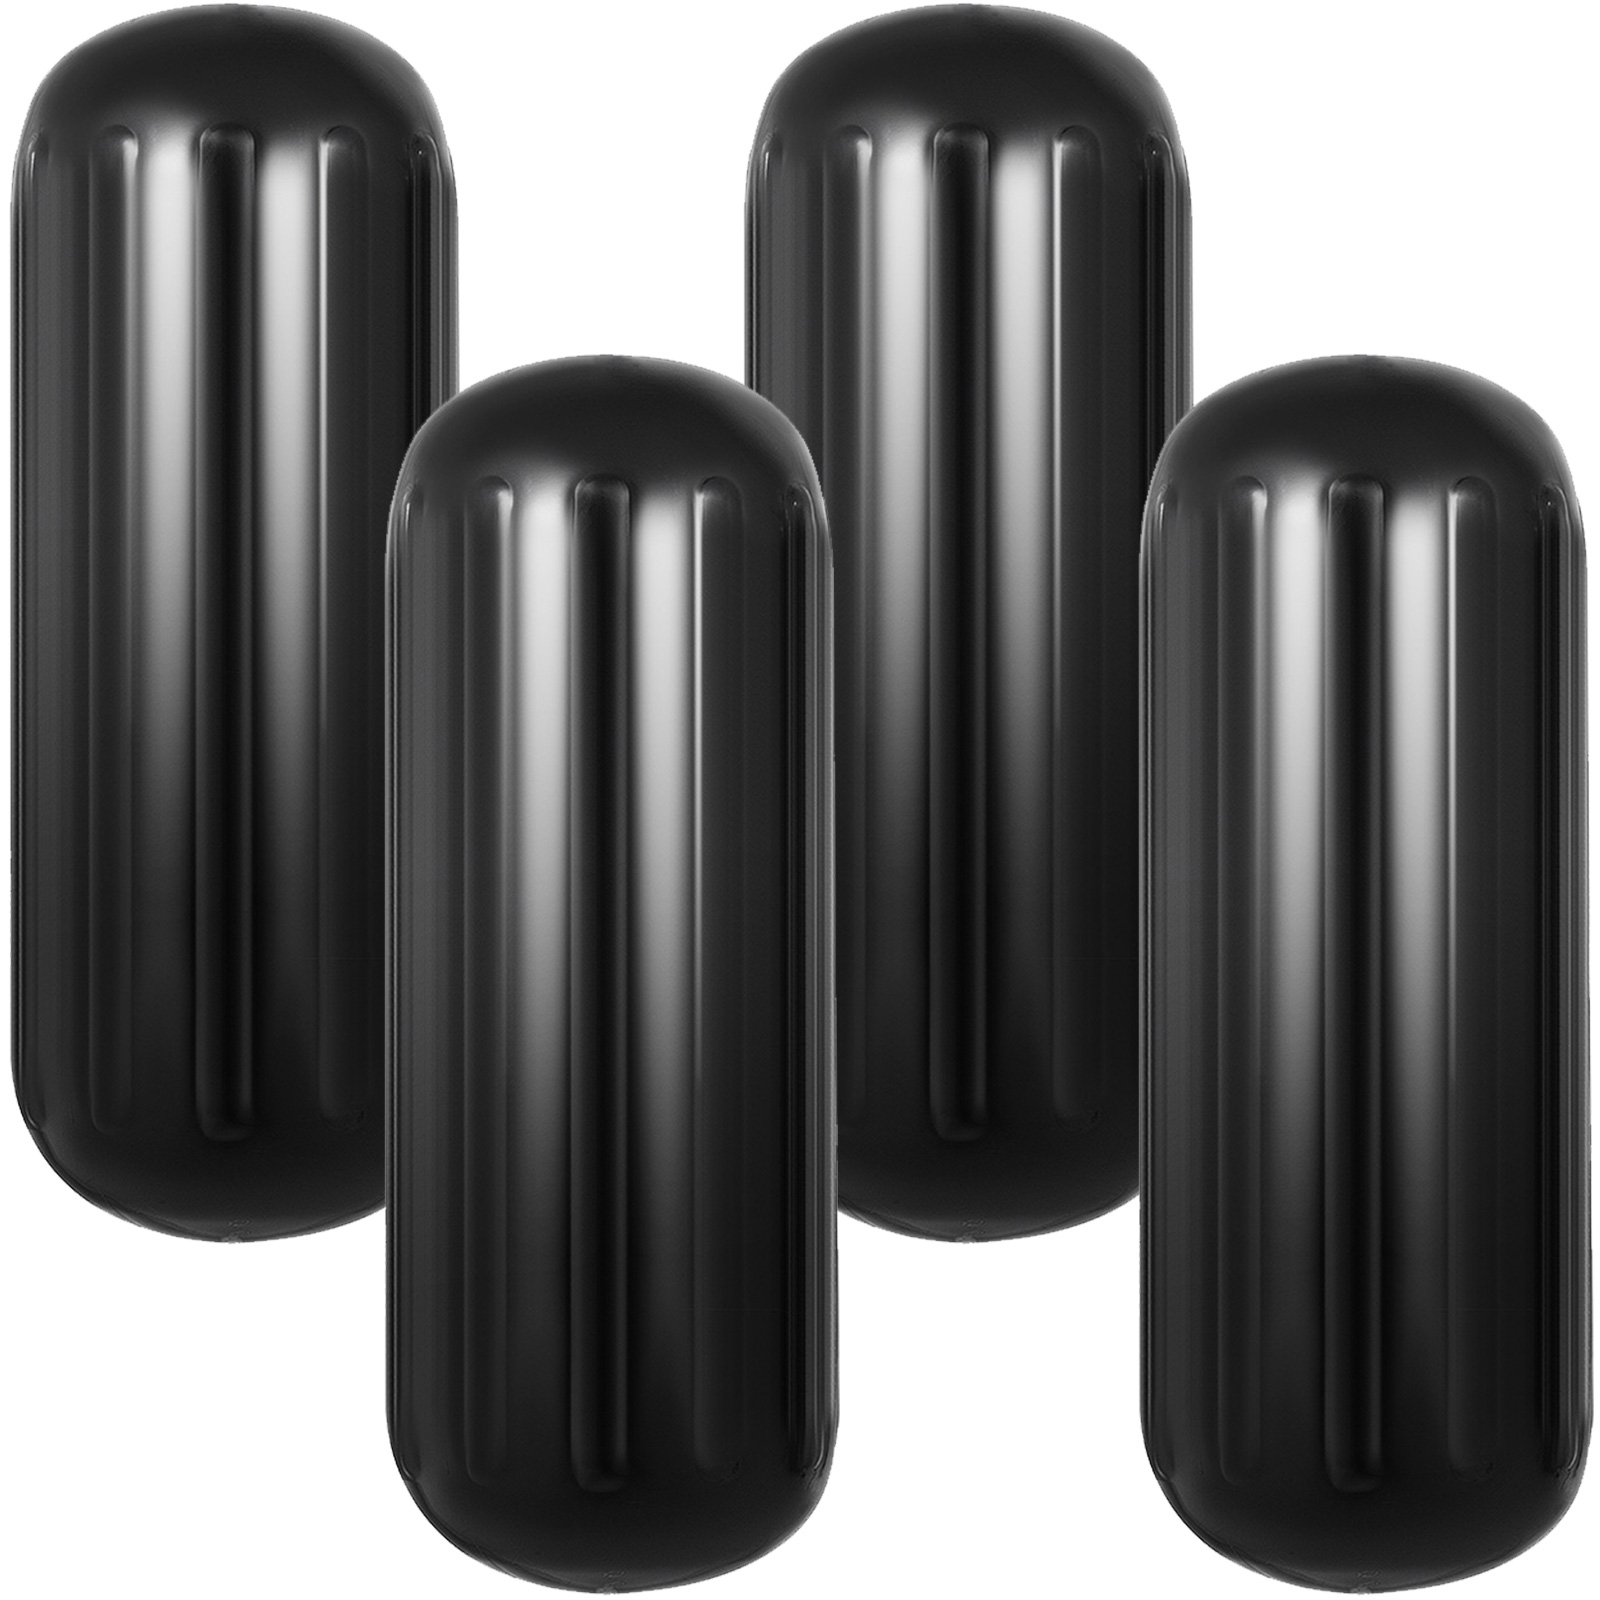 4 NEW RIBBED BOAT FENDERS 10" x 28" BLACK CENTER HOLE BUMPERS MOORING PROTECTION от Vevor Many GEOs